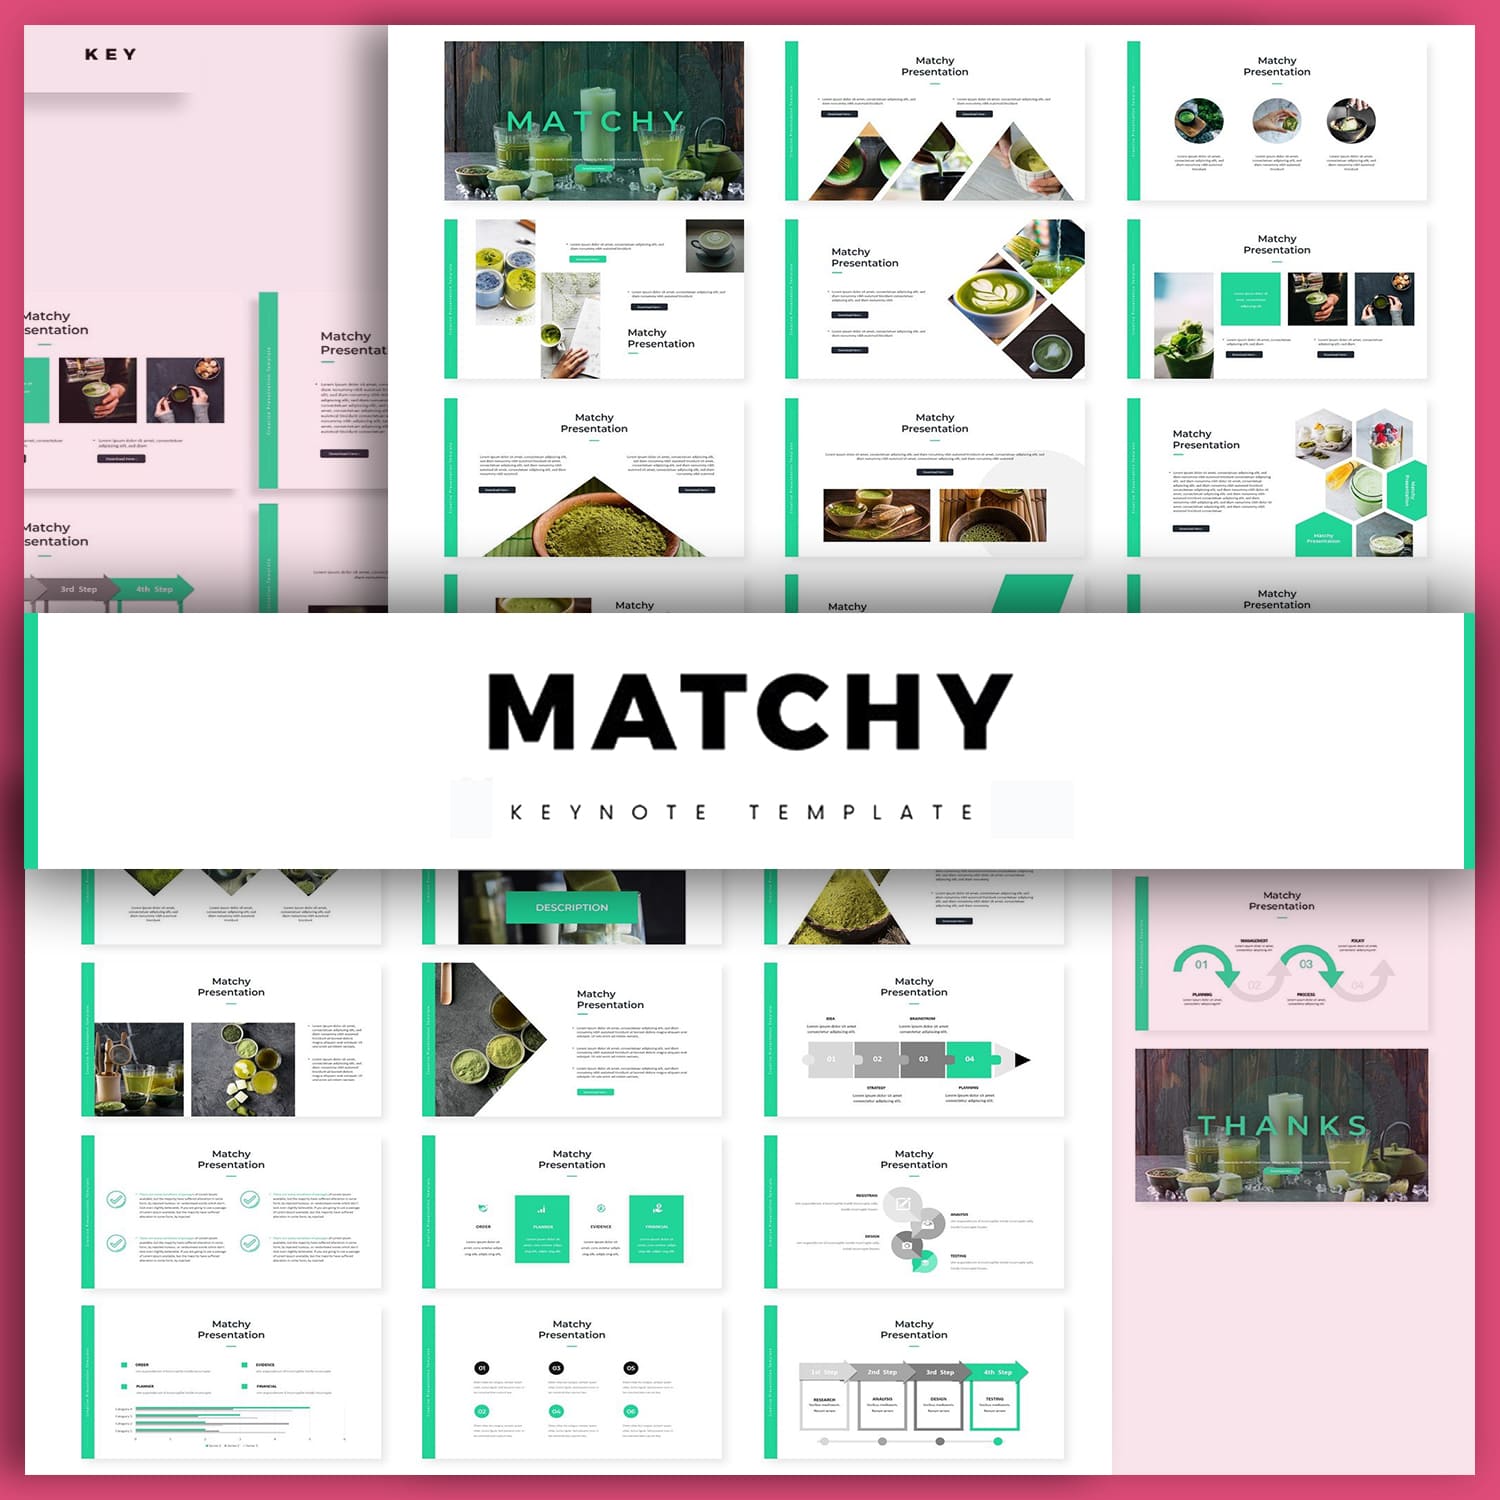 Matchy - Keynote Template cover image.